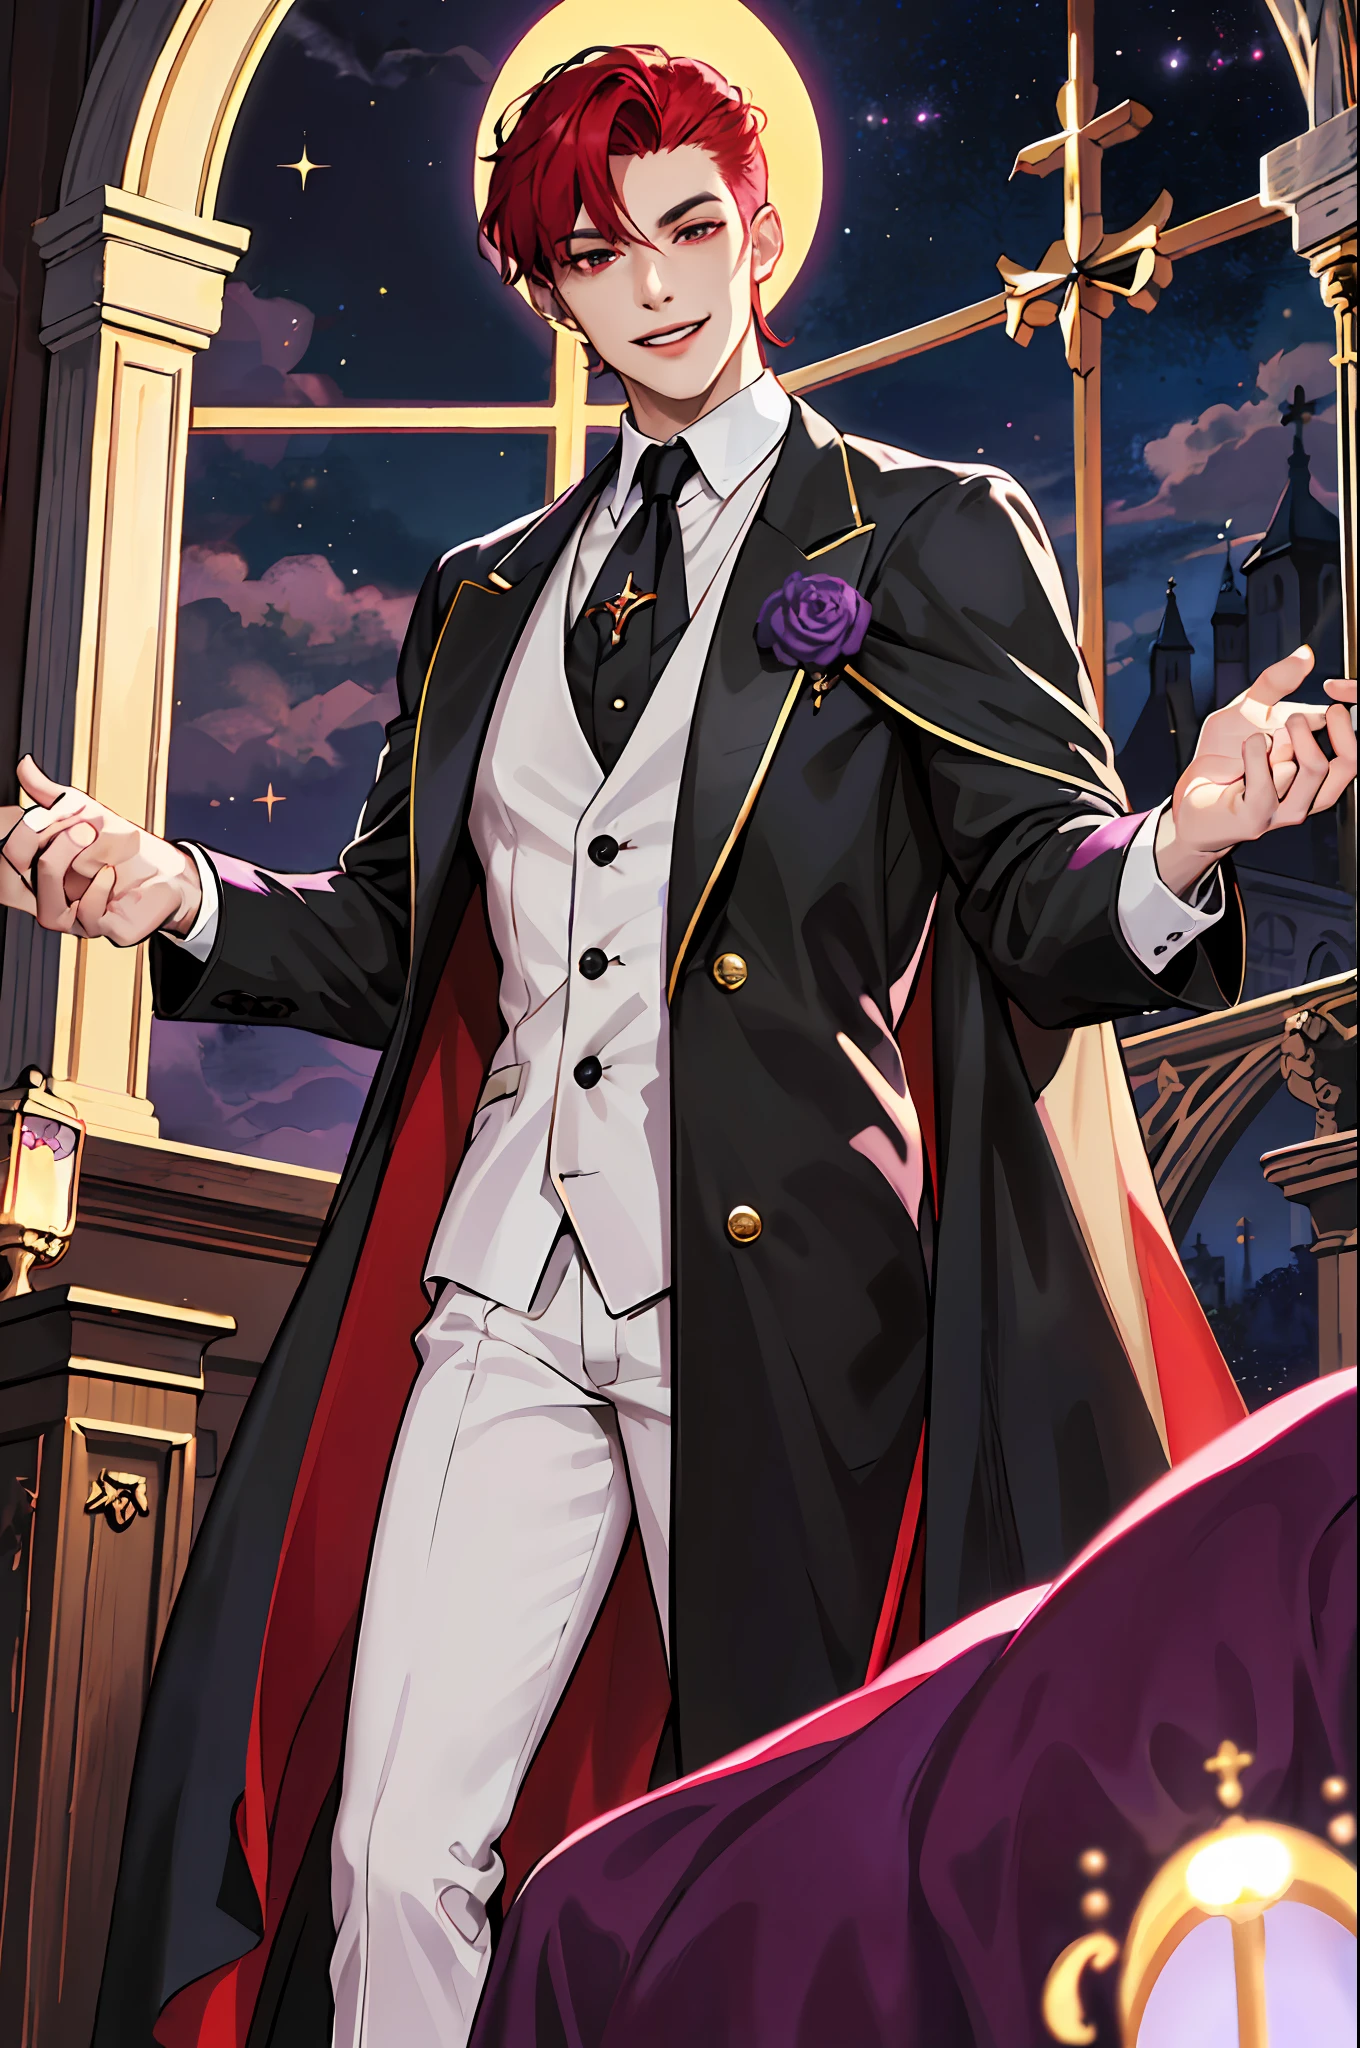 This is what a real Vampire looks like! Antique vampire clothes, elegant, gentlemanly. He is smiling friendly, his red hair is vivid, his red eyes shine against his perfect skin. In the background a purple church window, with moonlight reflecting behind. All this is in a beautiful and dark light, which makes it look amazing。 (High quality: 1.2, Church at night: 1.5, Antique Vampire Clothing: 1.4) (((At night))) (Provocative light, mysterious darkness) (((Violet Moon))) Defined Face) Perfect Hands)